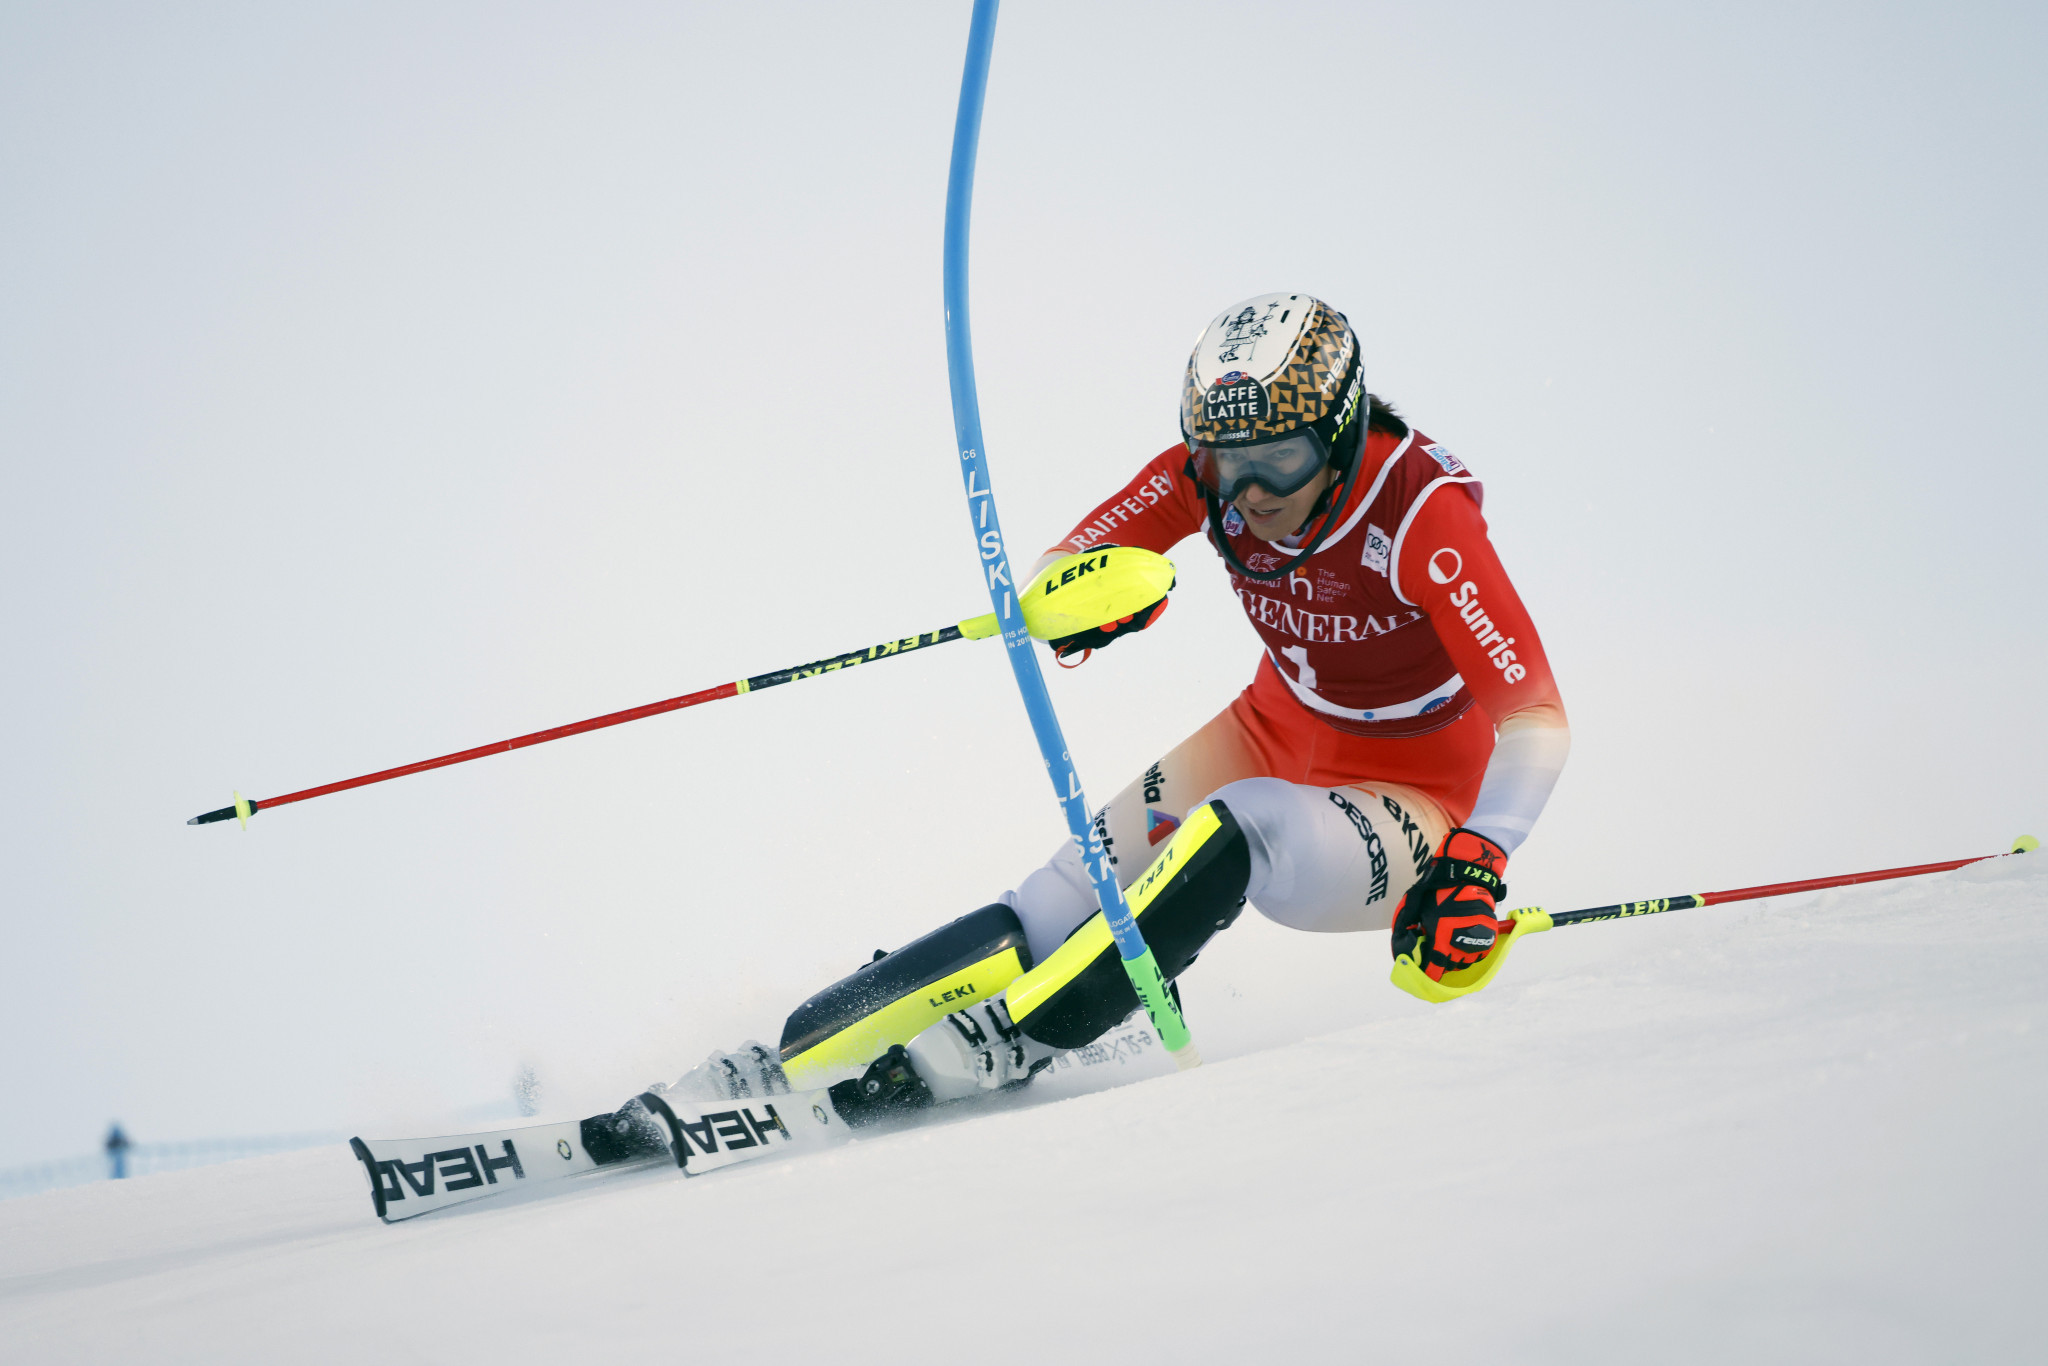 Wendy Holdener laid down a fantastic second run to take silver in Levi ©Getty Images